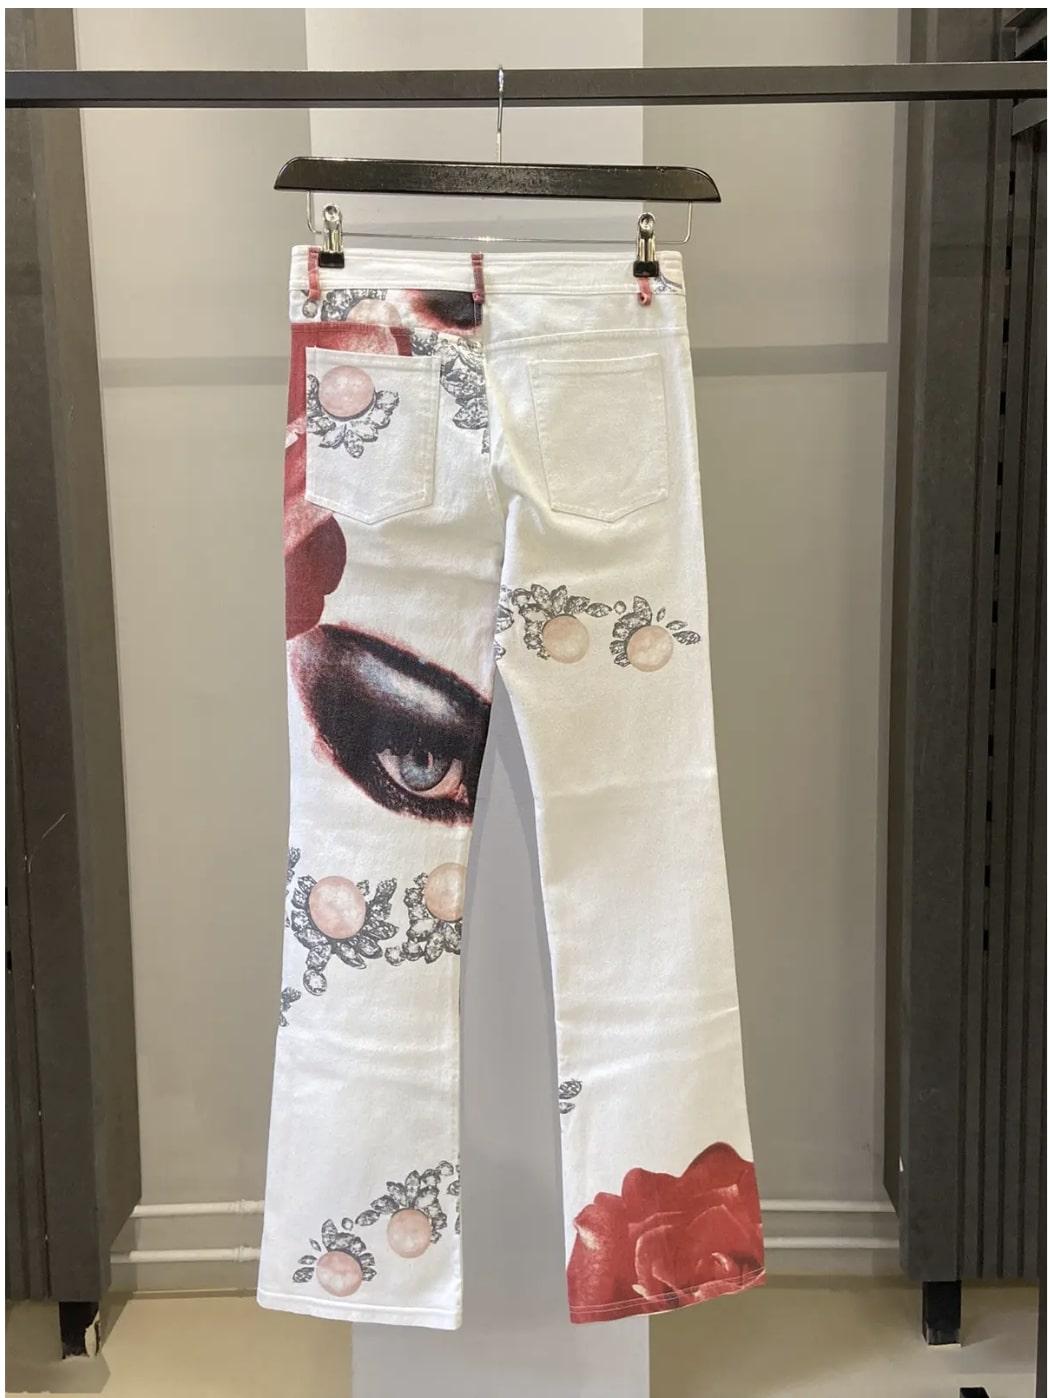 Alexander McQueen
90s Vintage Printed Denim
Size IT 42

Beautiful Alexander McQueen 90s vintage printed denim in a size IT 42. In great condition without any flaws.